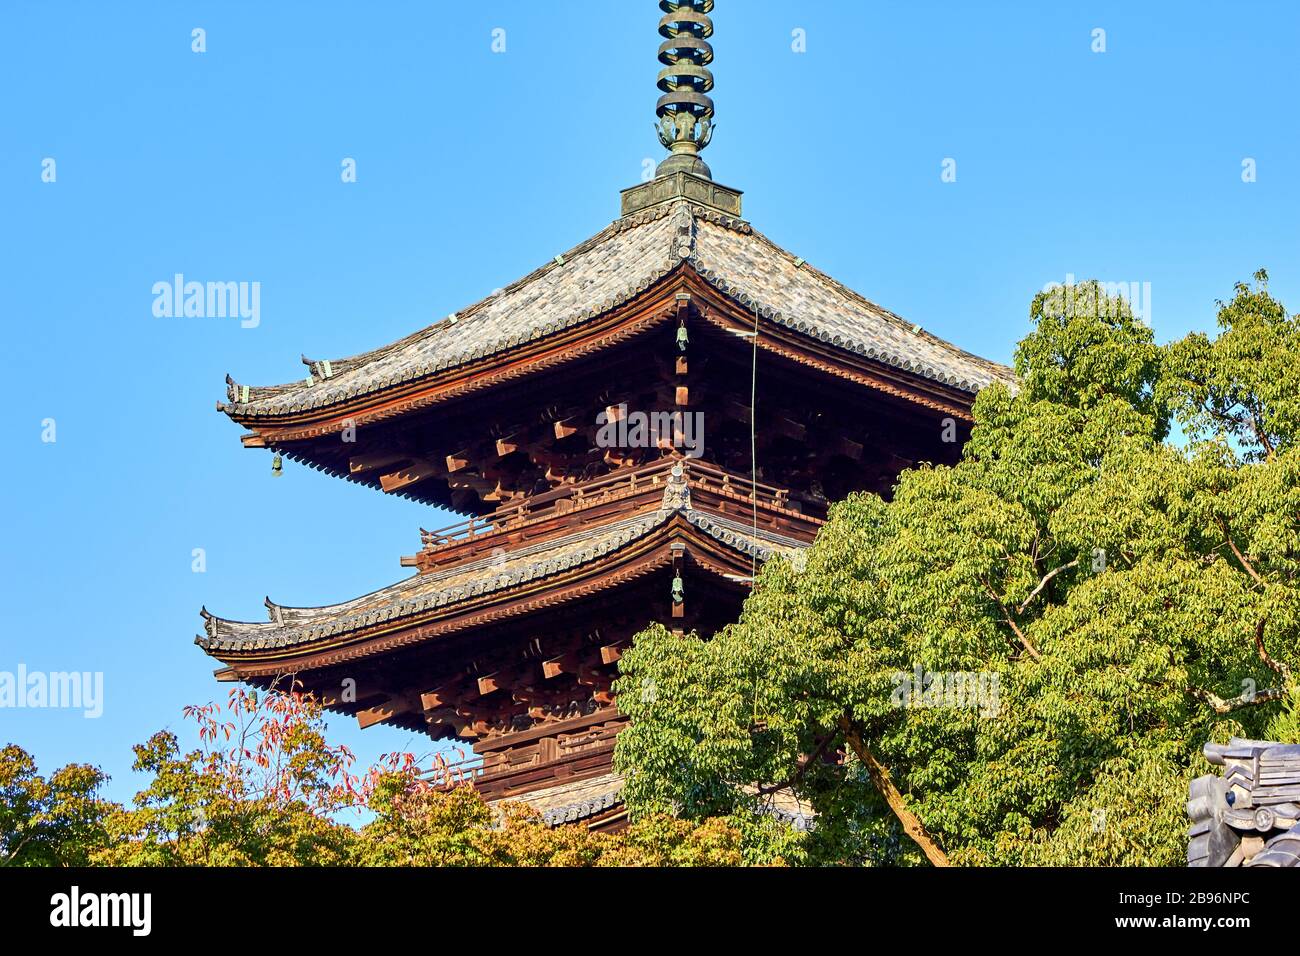 Huge pagoda surrounded by trees Stock Photo